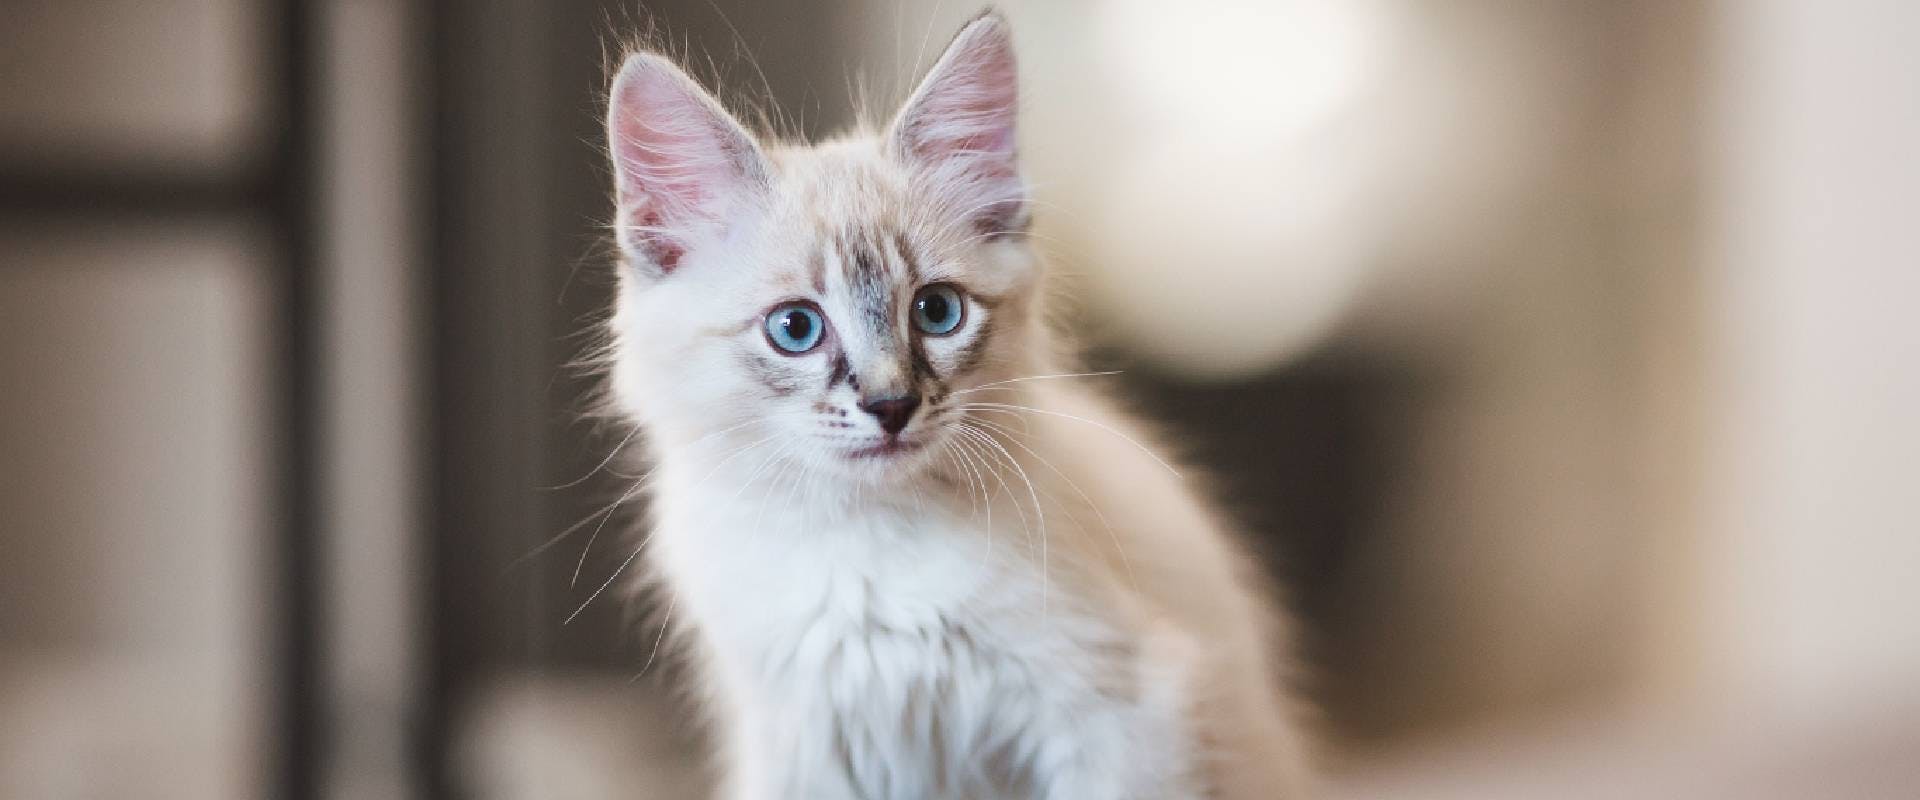 White and grey cute kitten with blue eyes